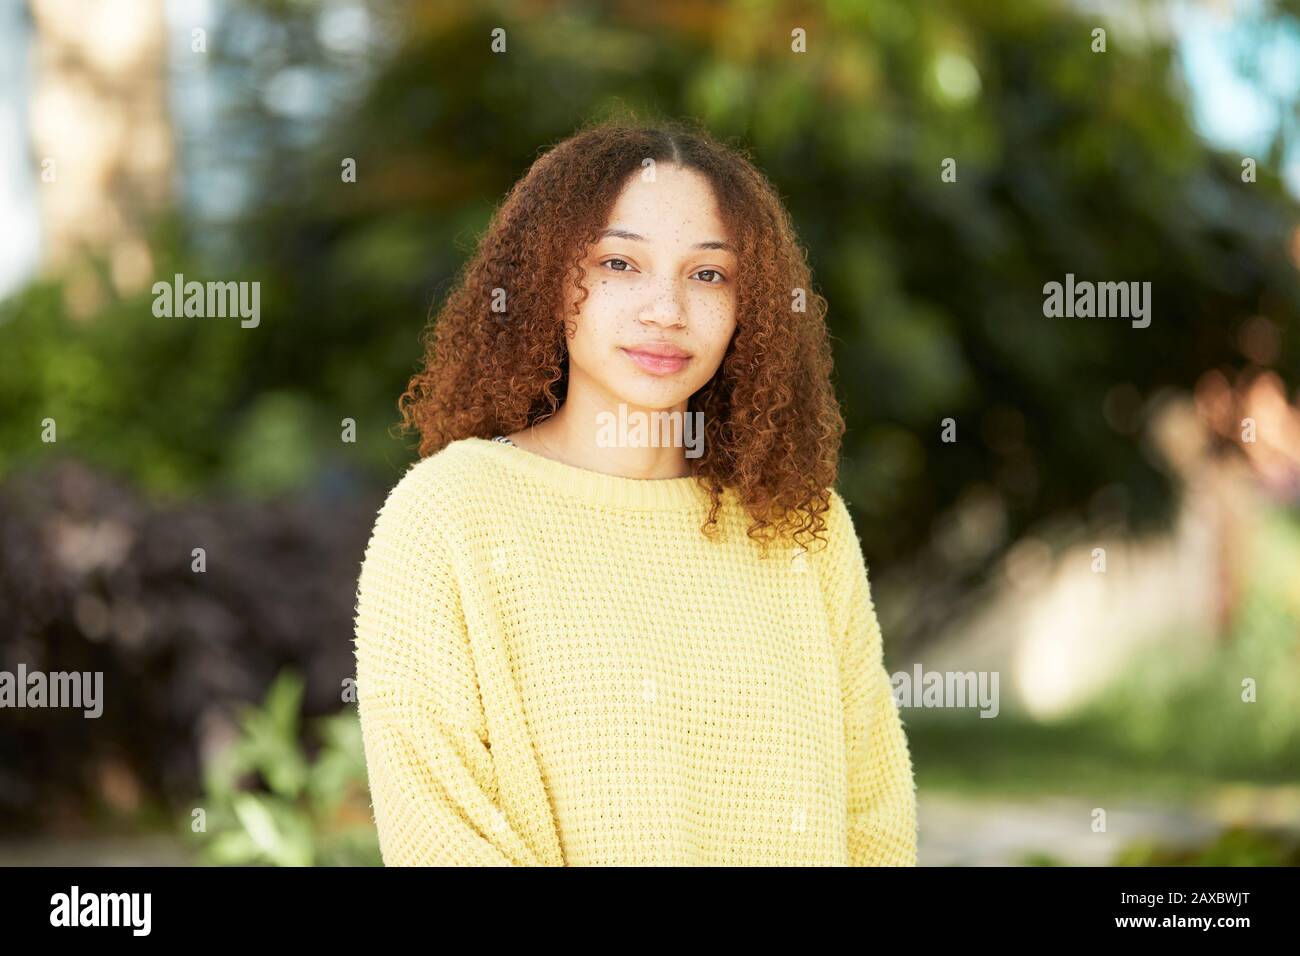 Portrait confident young woman in yellow sweater Stock Photo